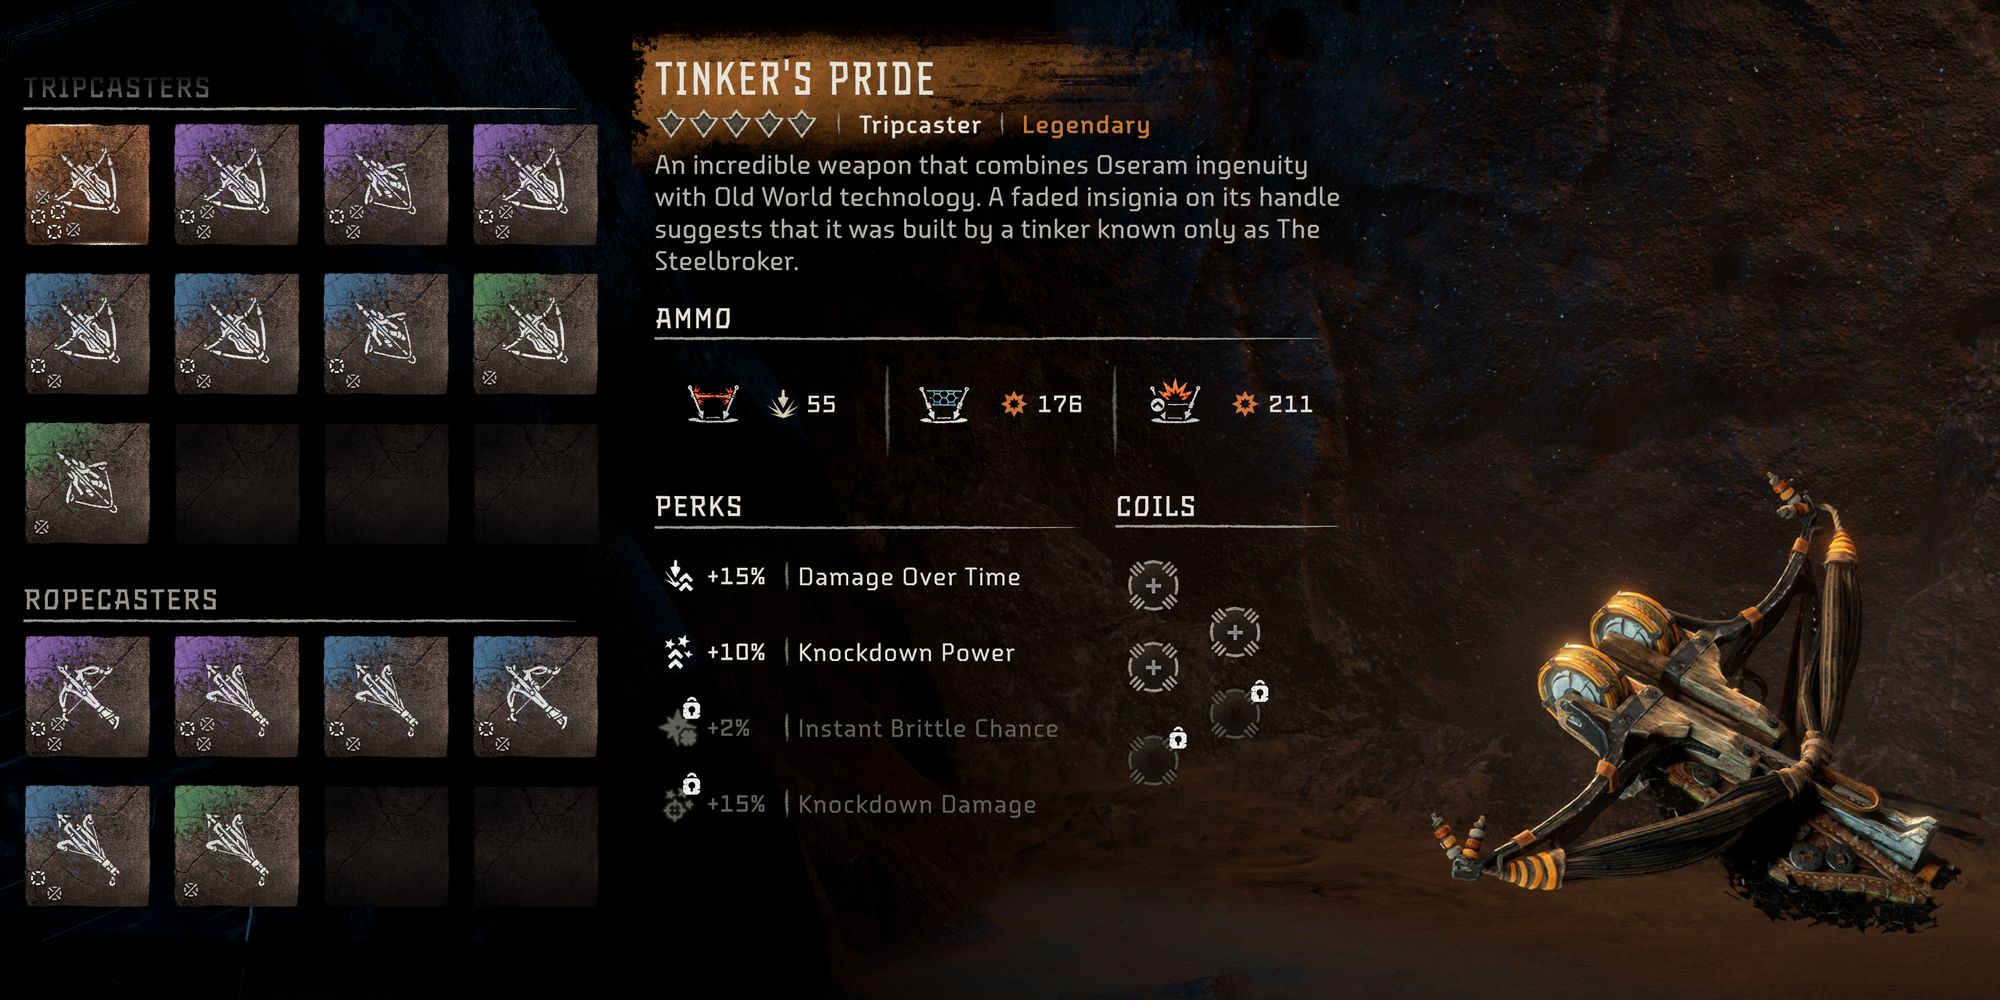 Equipment screen showing the Tinker's Pride in Horizon Forbidden West, a Tripcaster weapon.